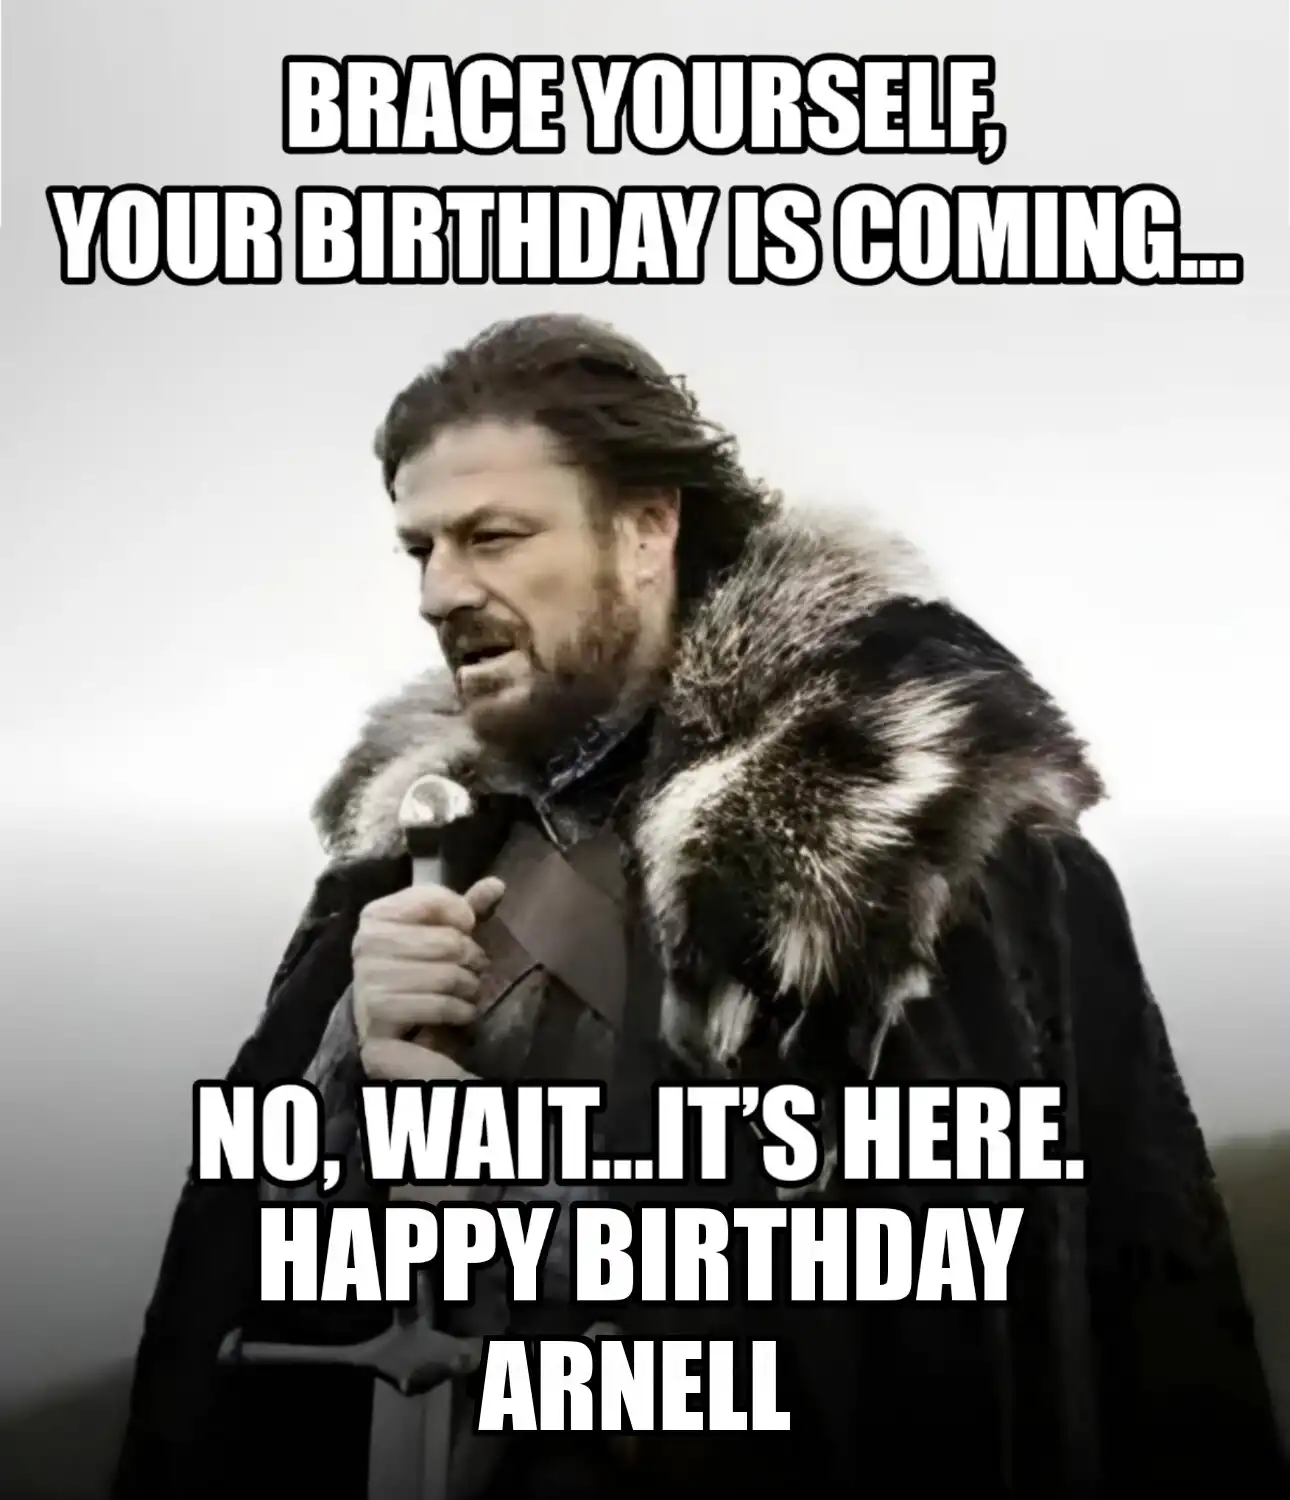 Happy Birthday Arnell Brace Yourself Your Birthday Is Coming Meme